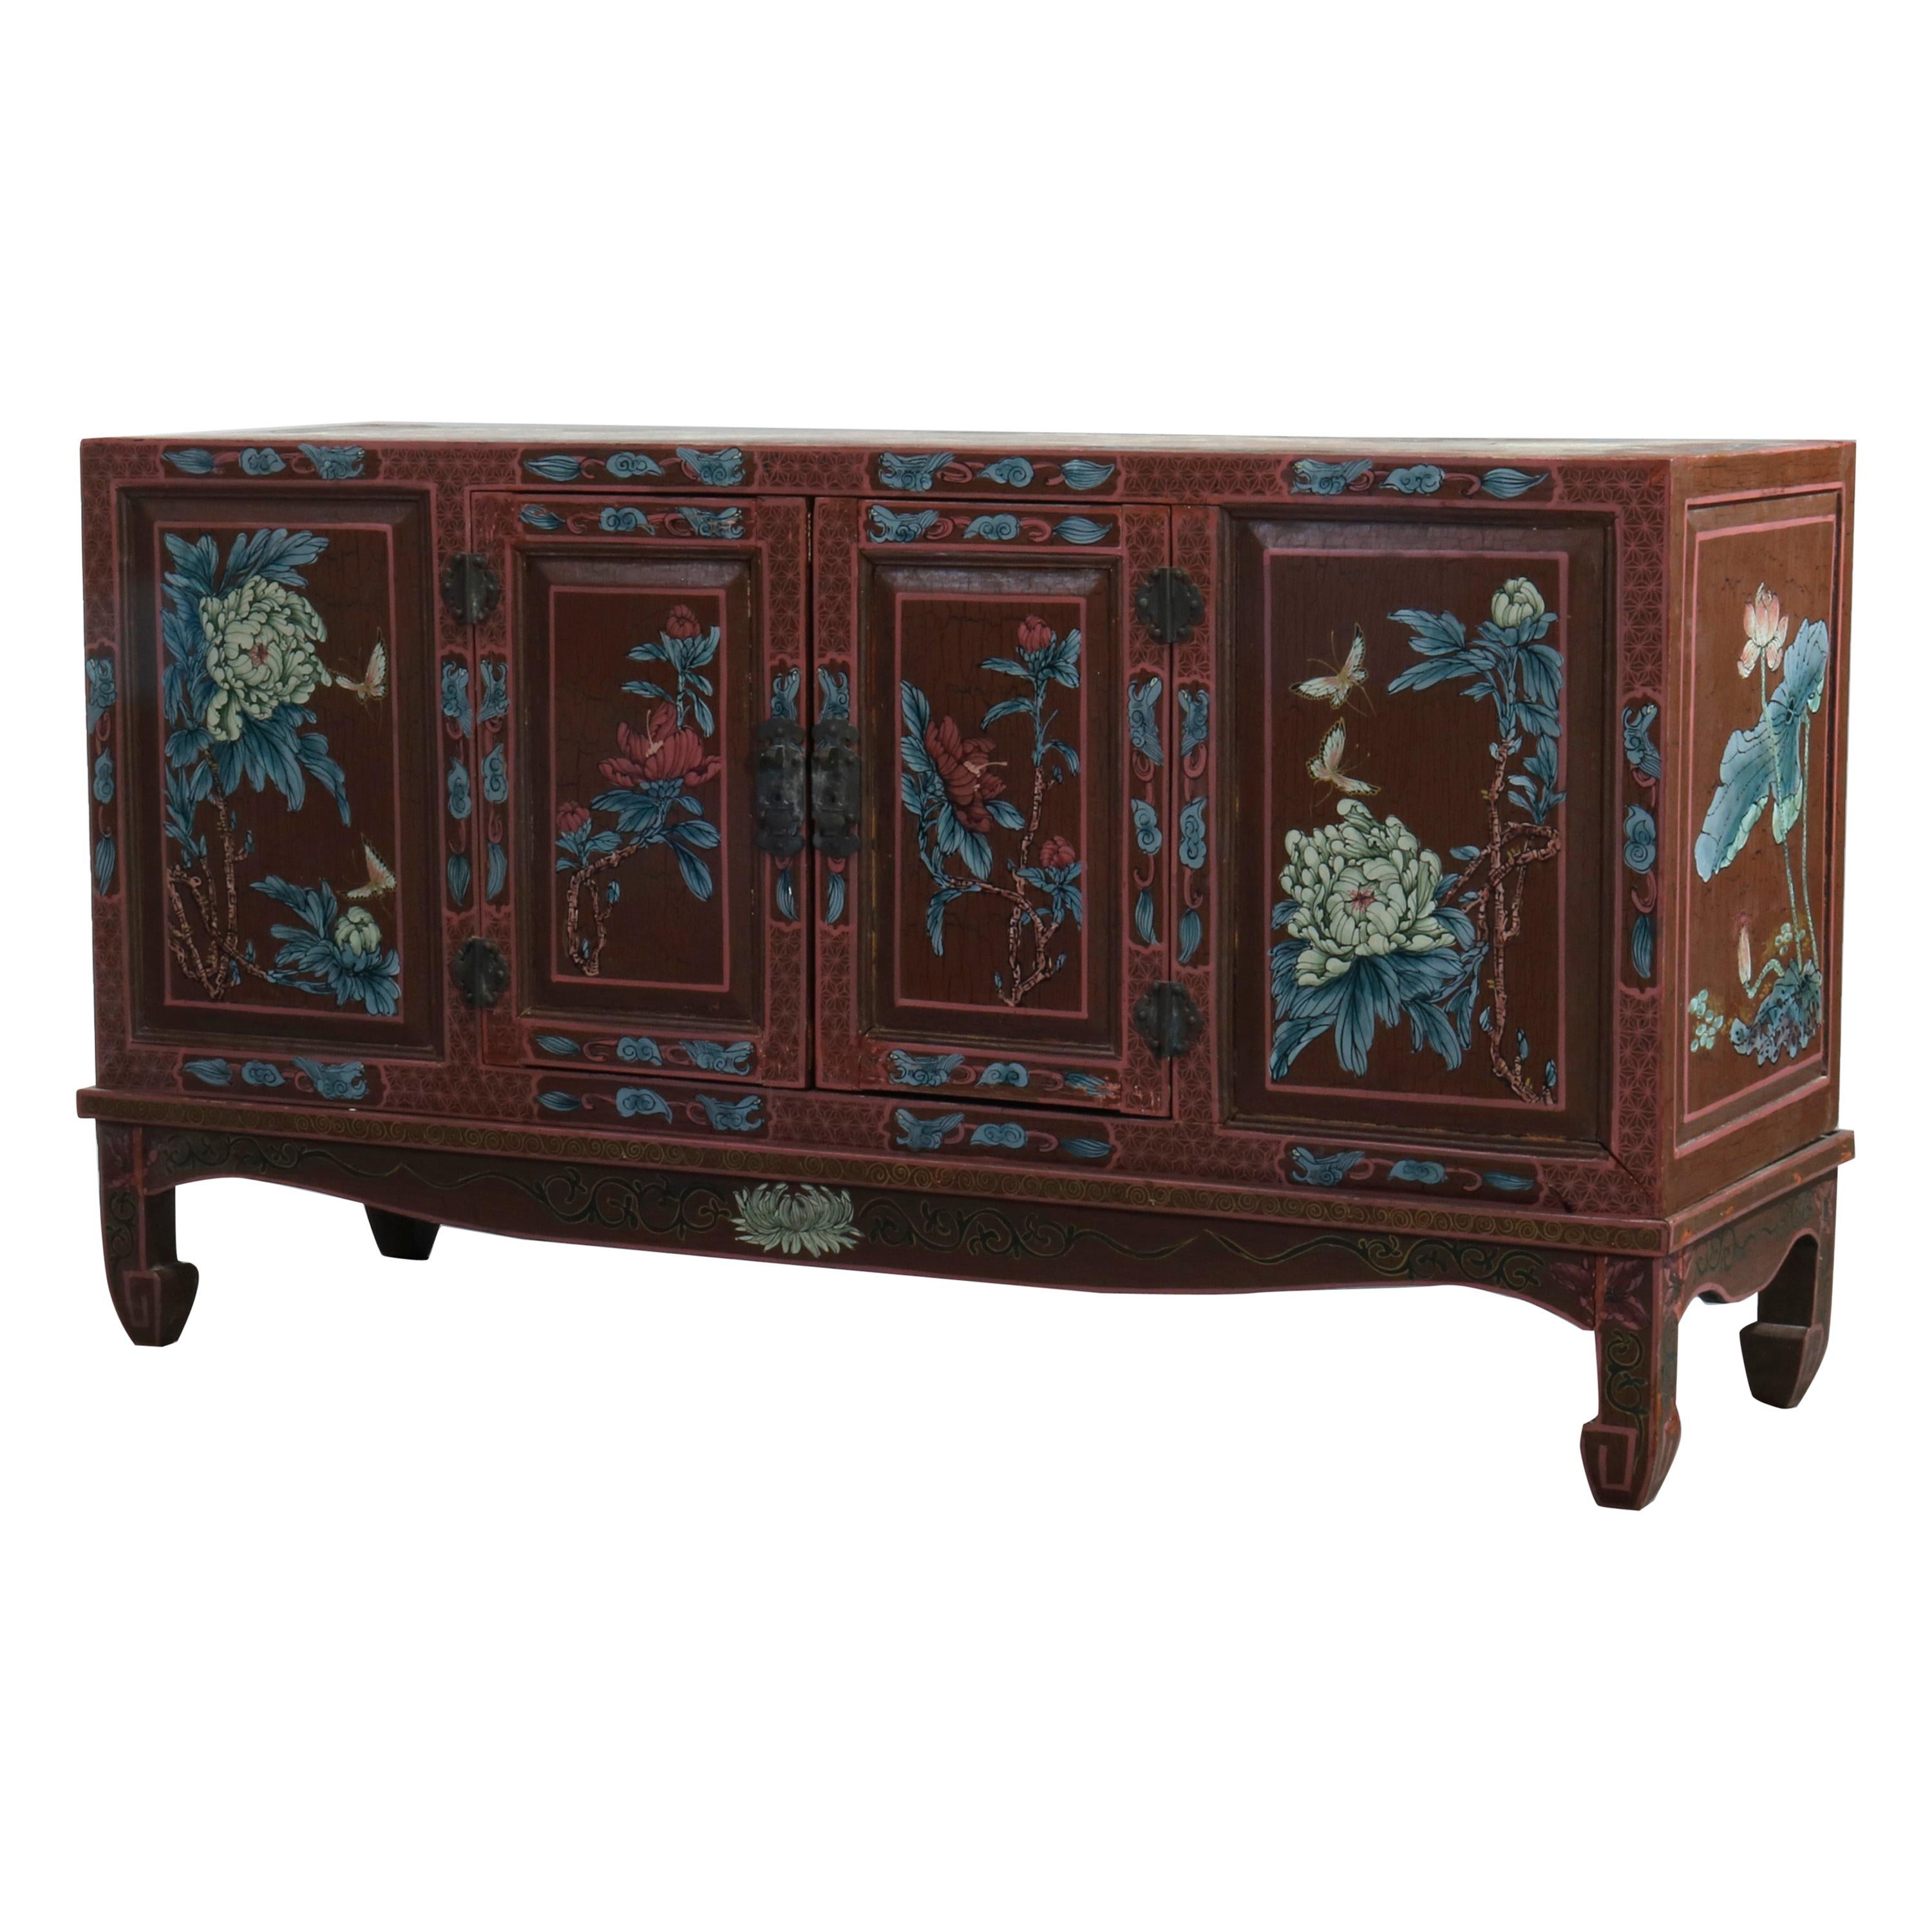 Antique Chinoiserie Paint Decorated Credenza Cabinet, 20th Century